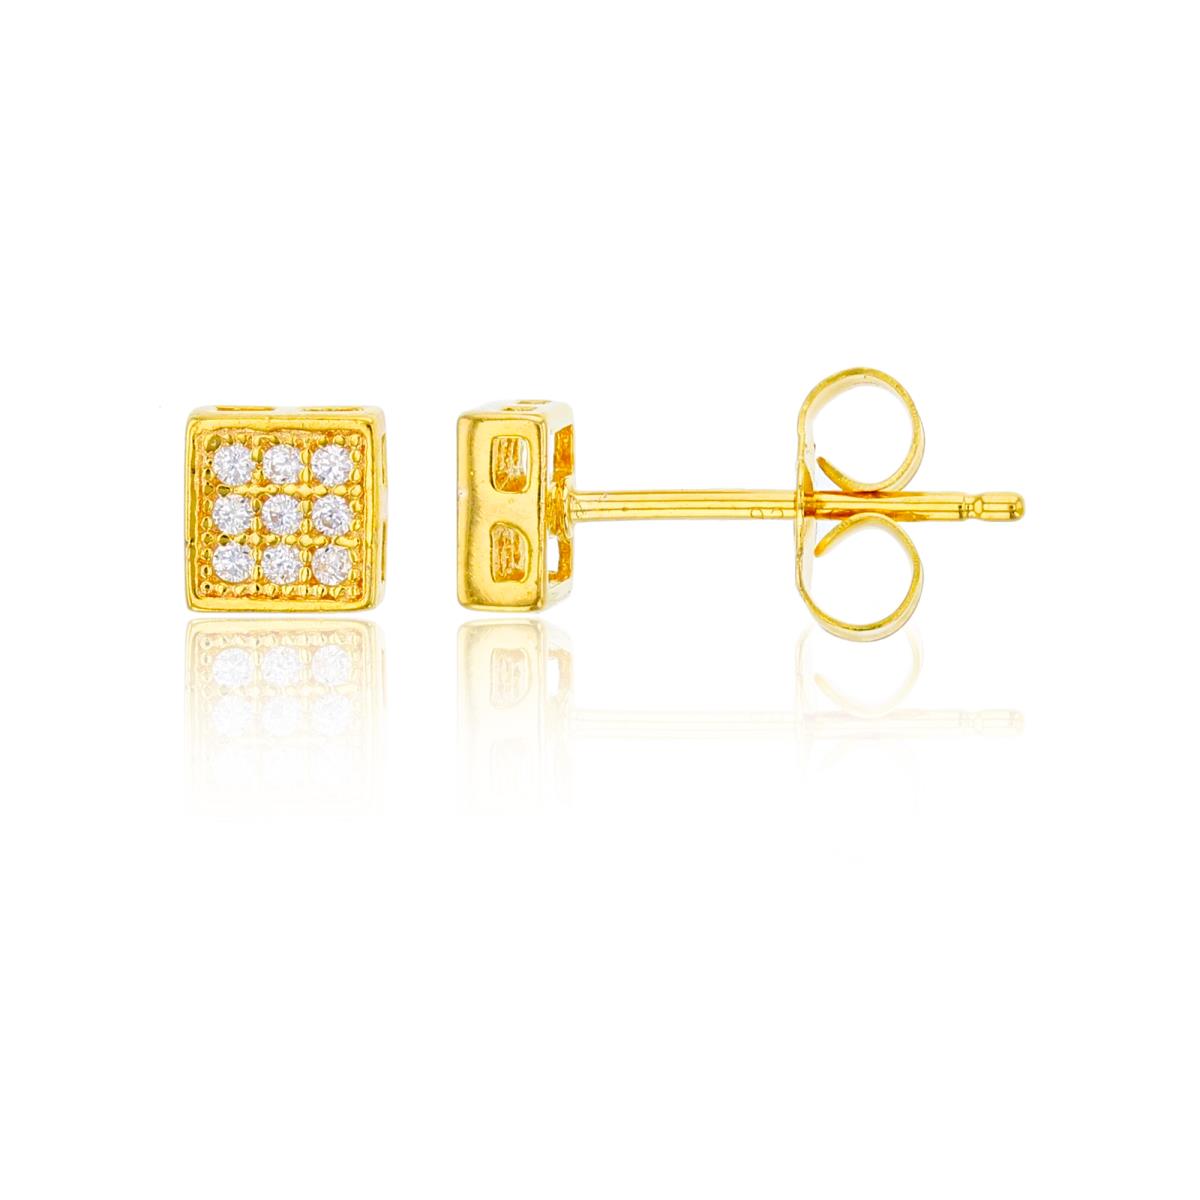 Sterling Silver Yellow 5.3x5.3mm Pave Square Stud Earring